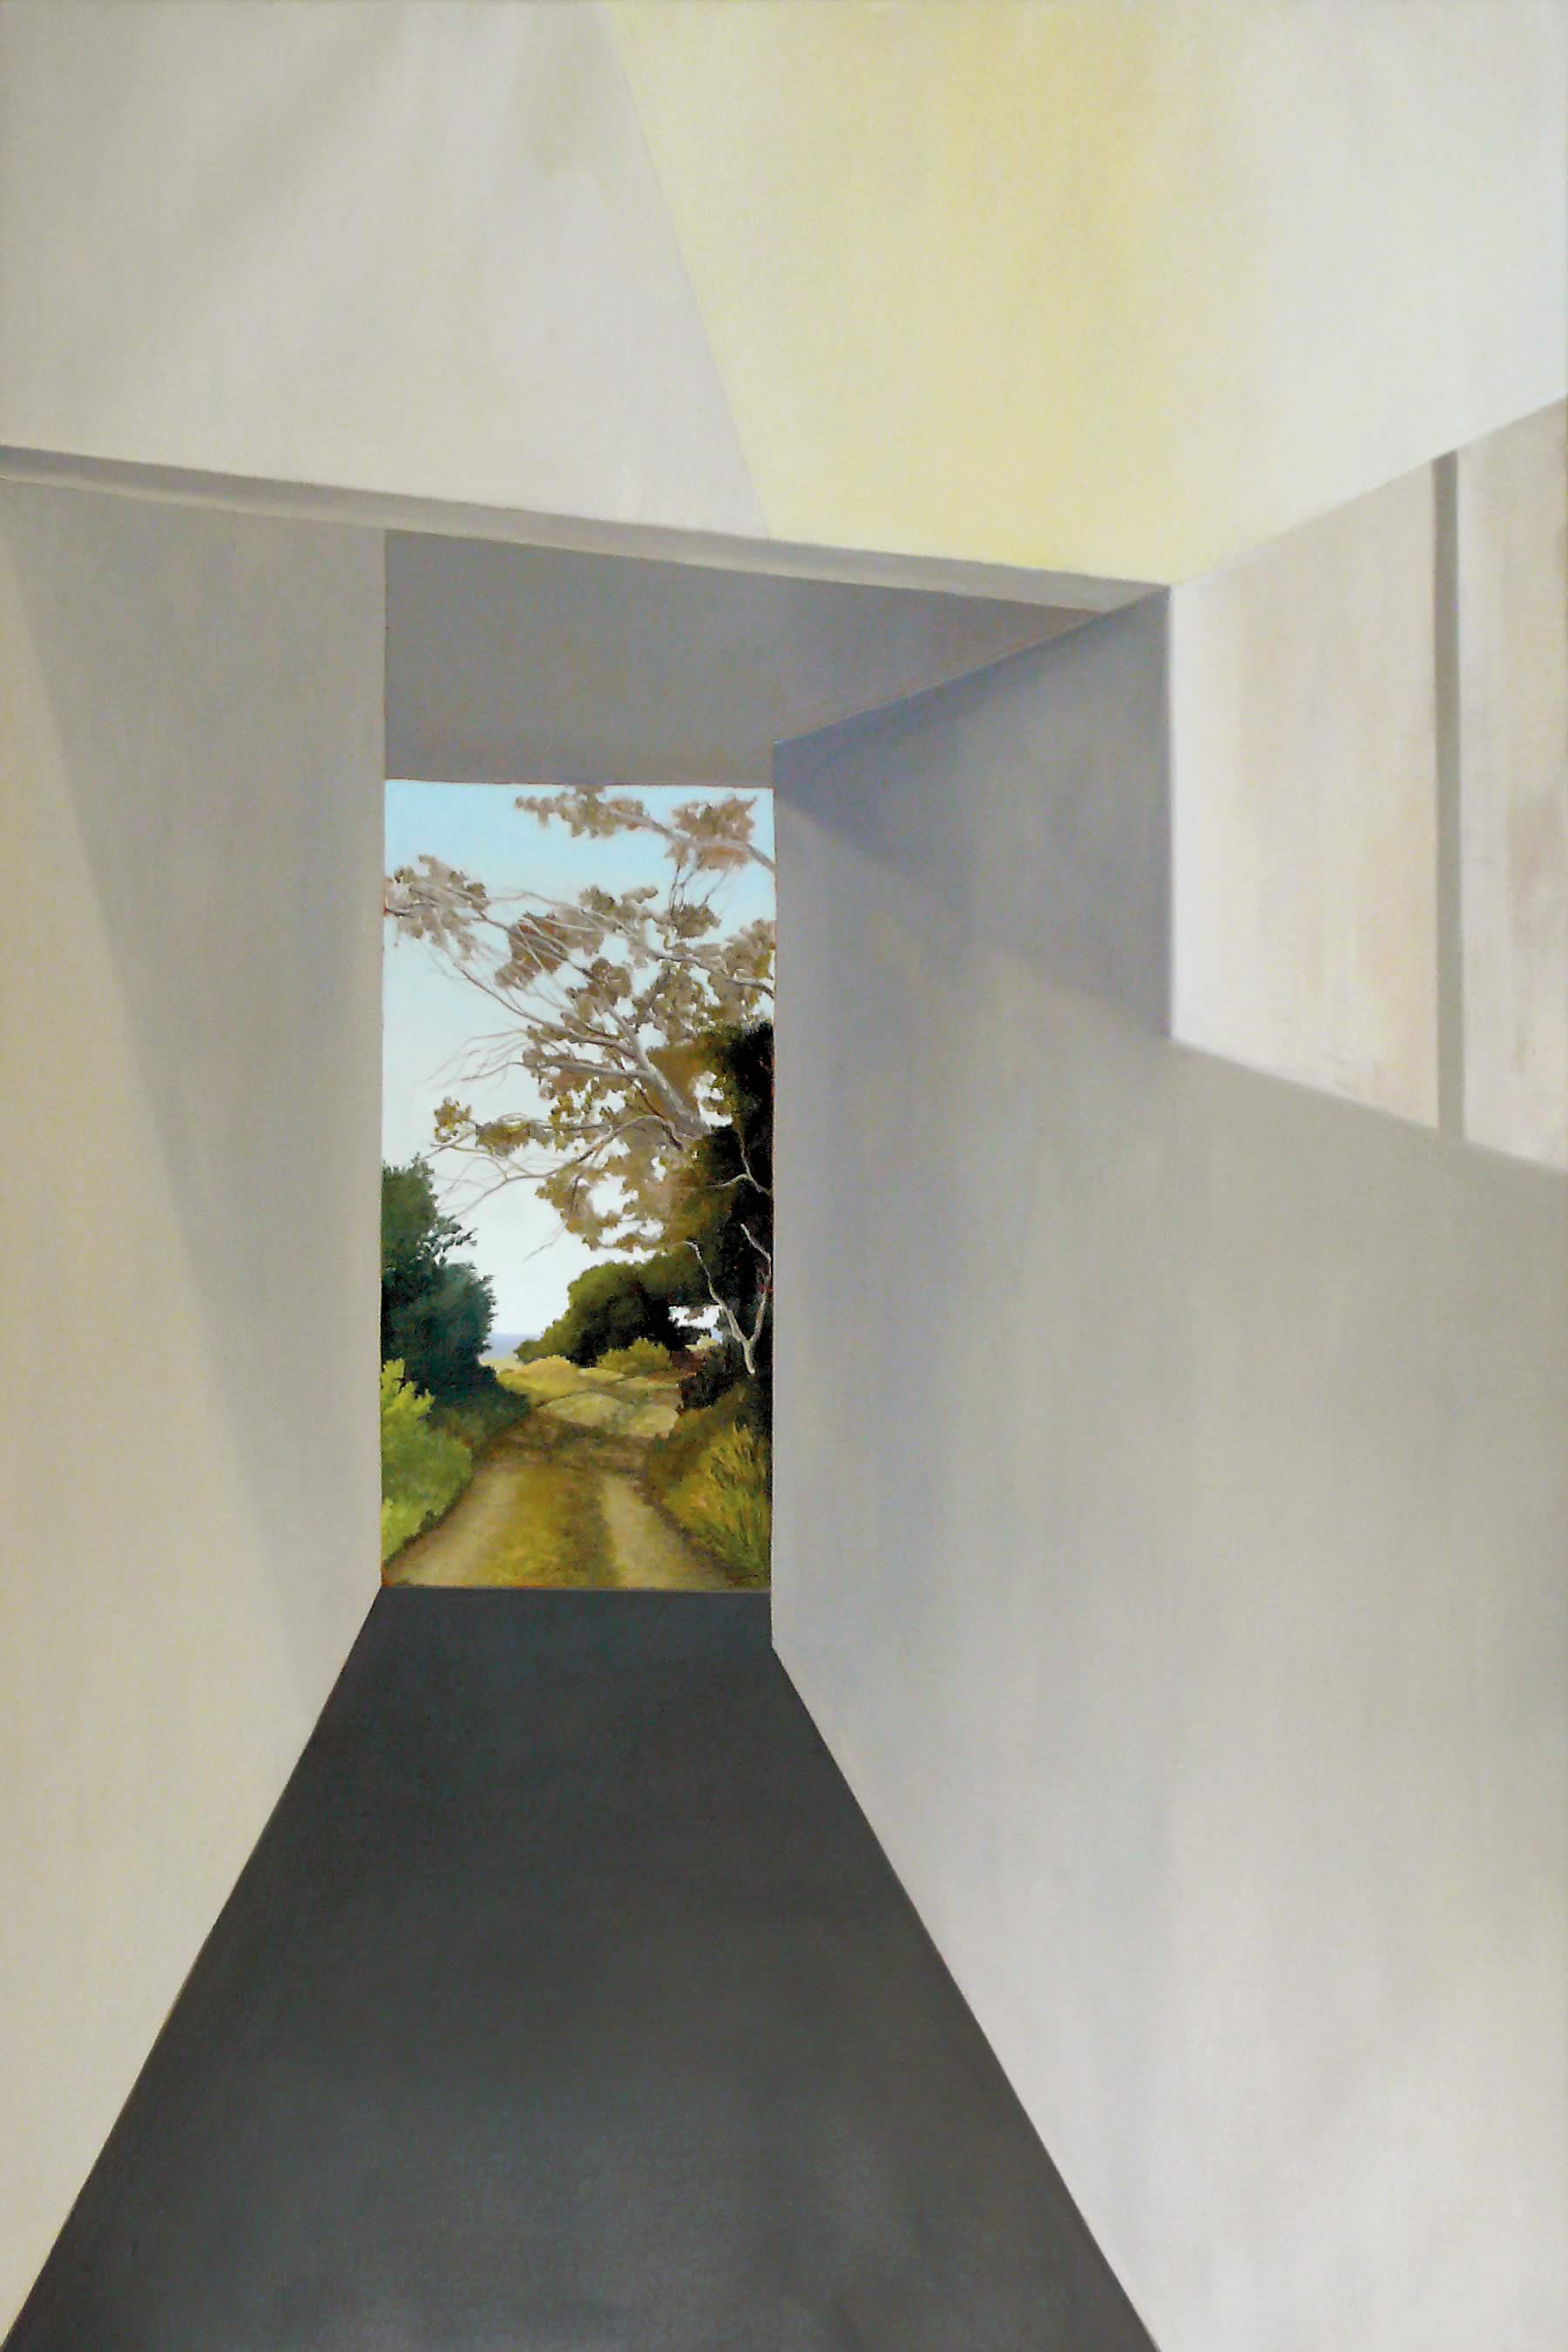 Painting by artist David Keeling, Untitled (2011) showing a hallway in an modern architecturally designed house with a large picture window revealing a coastal landscape with a walking track.